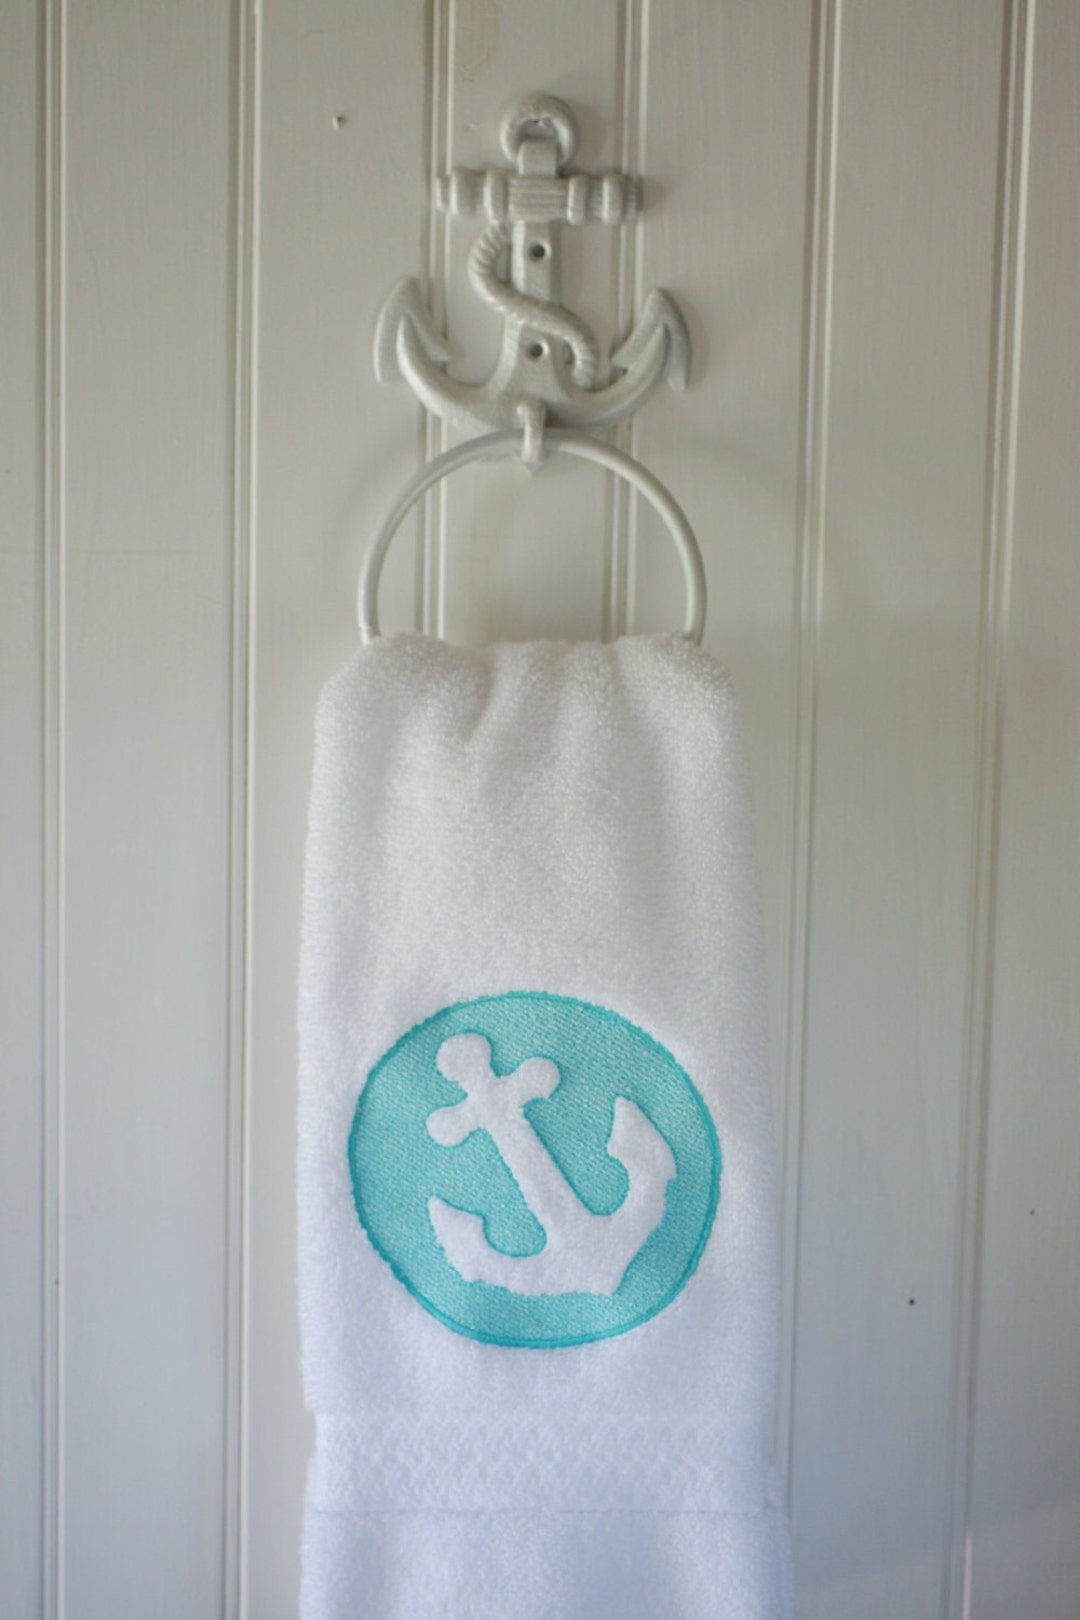 Embossed Embroidered Anchor Bath Hand Towel 16x30 Beach - Etsy